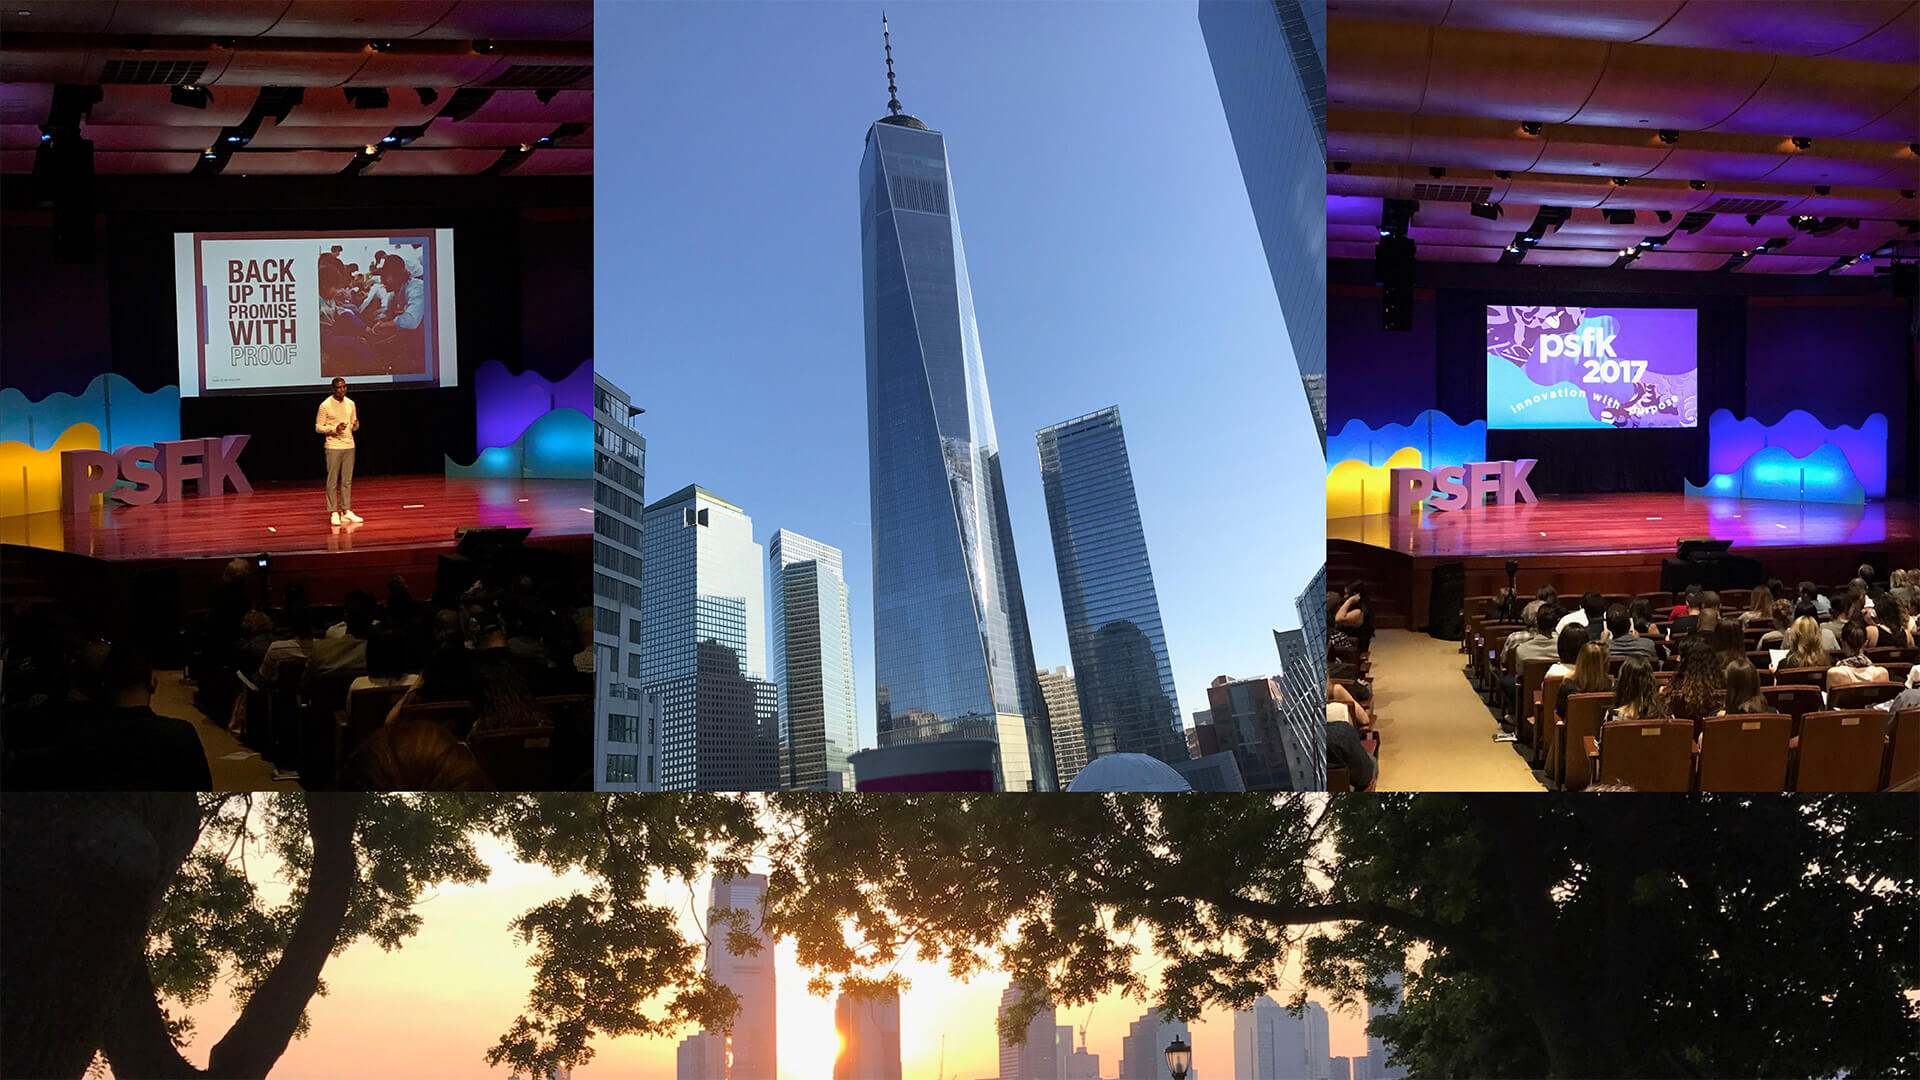 PSFK Conference in New York